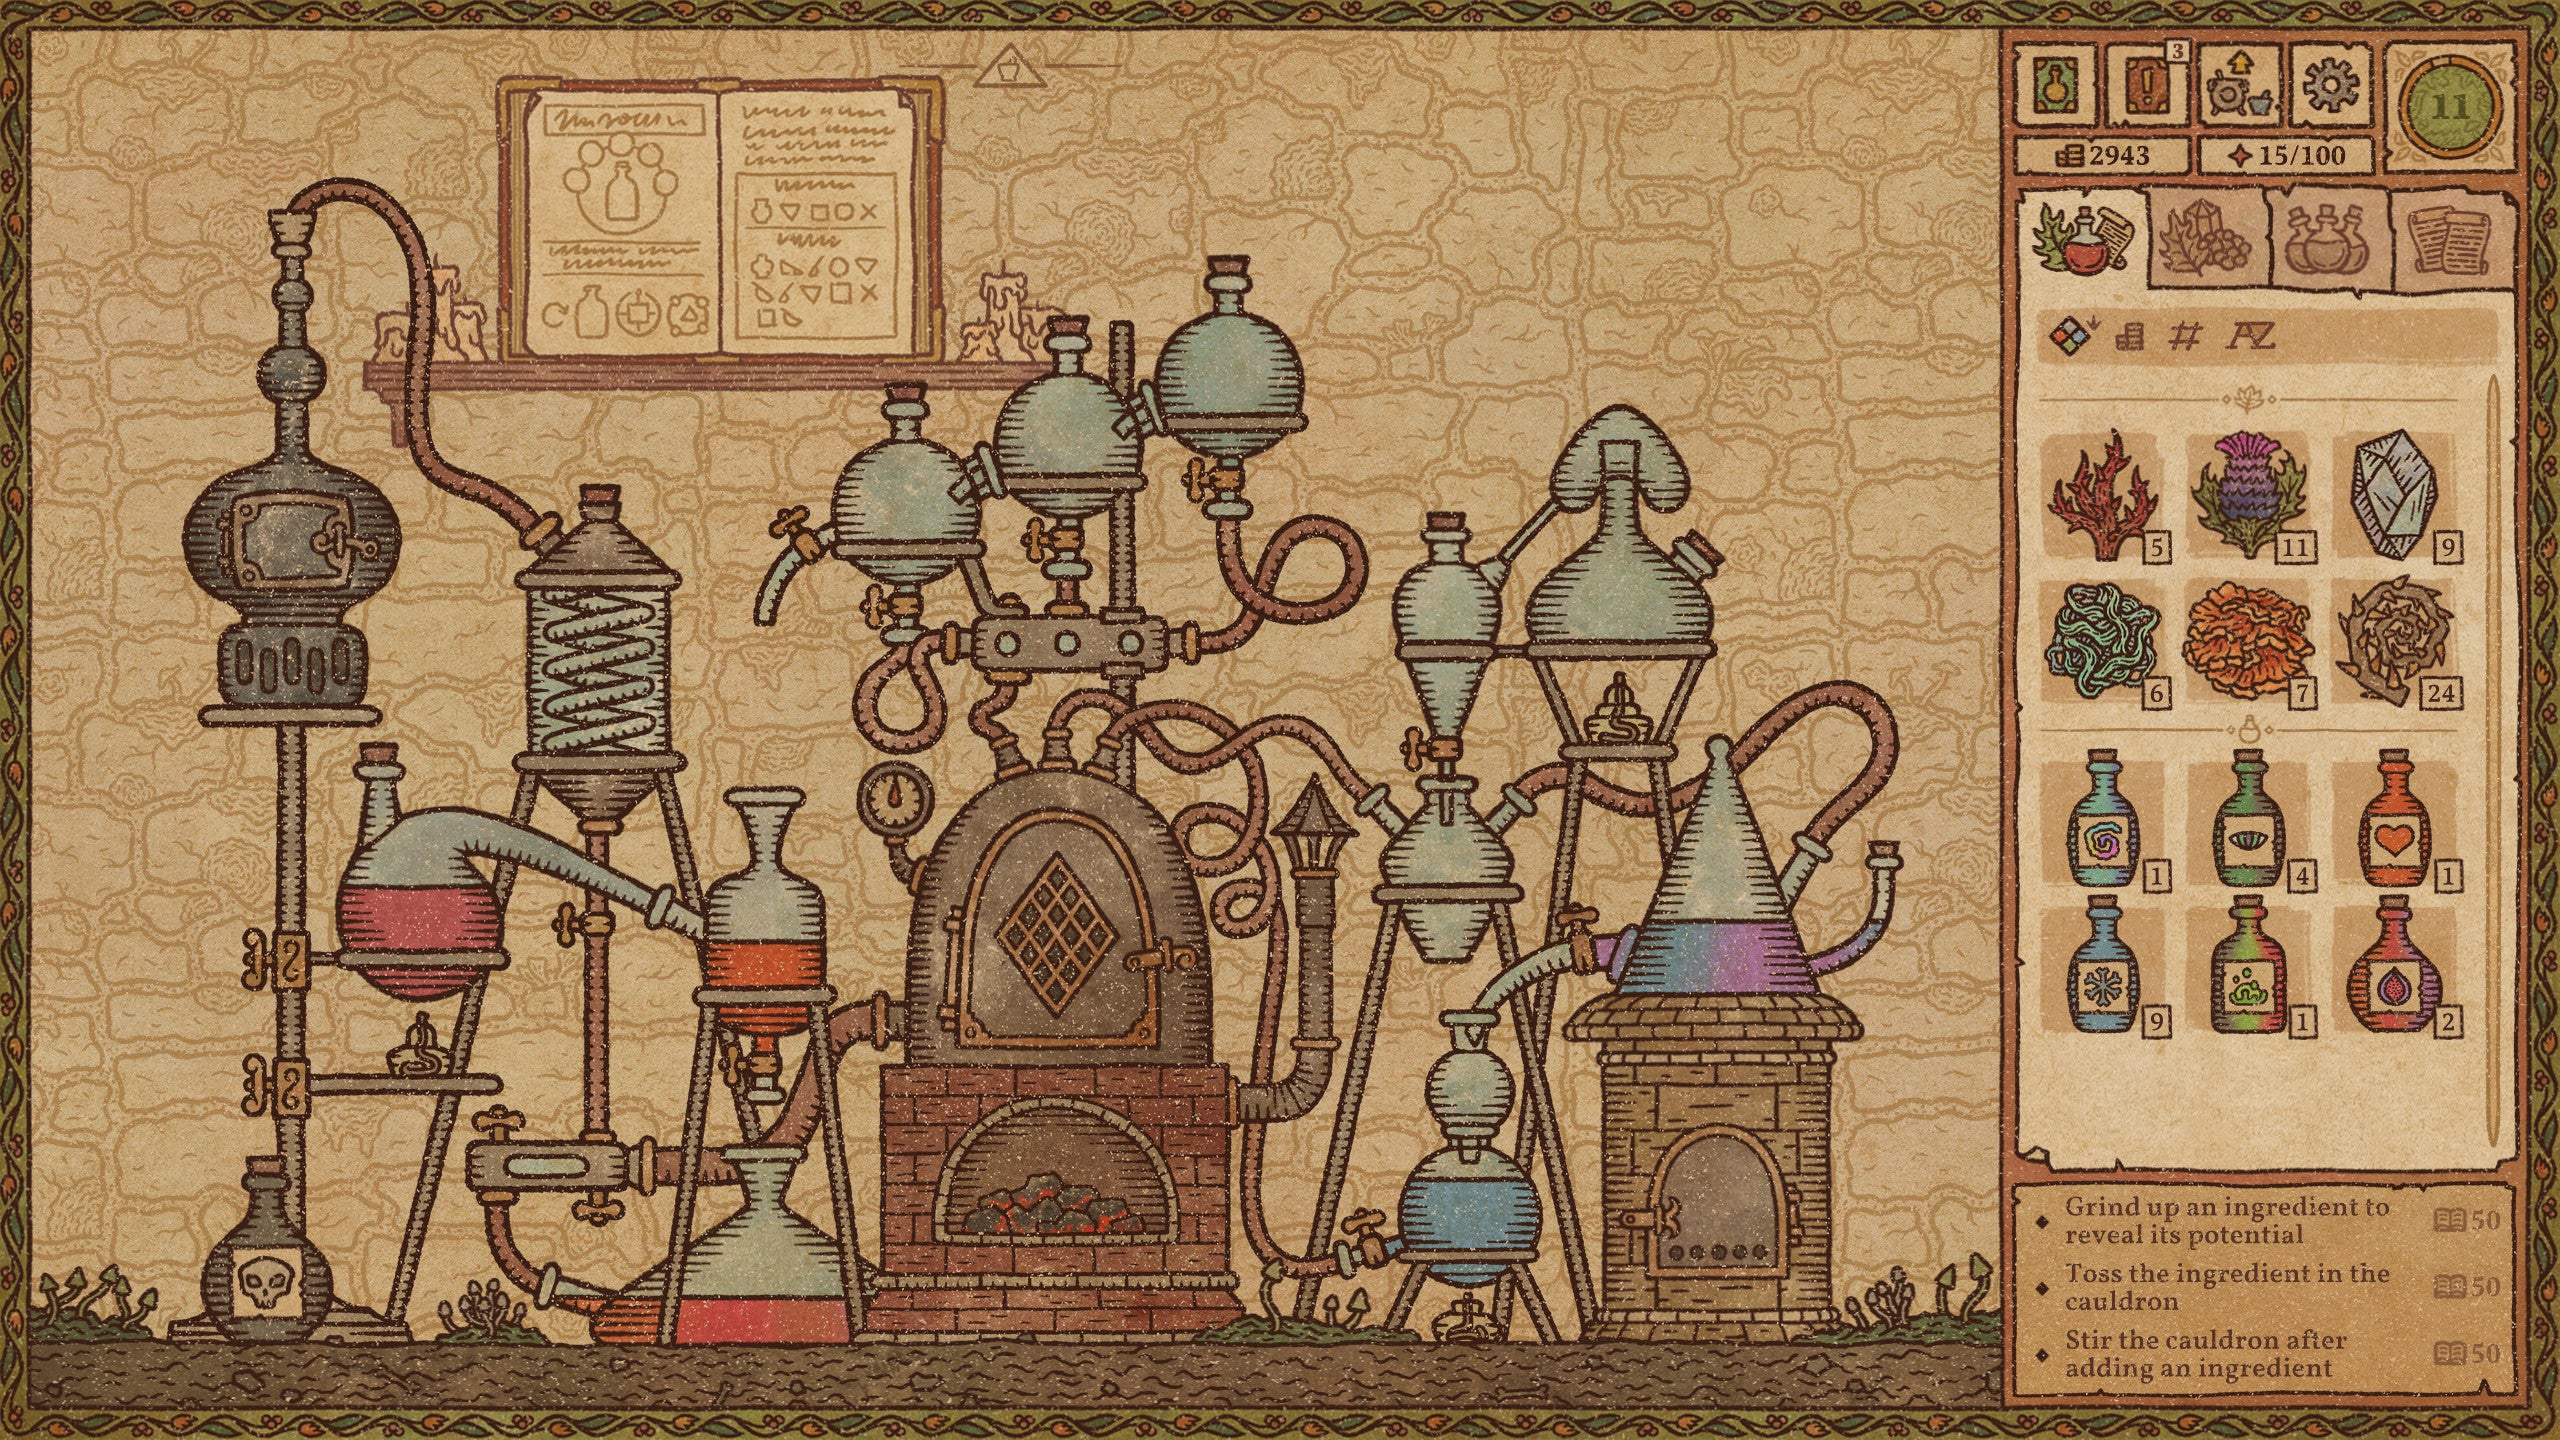 Potion Craft - the very complex Alchemy Machine with many test tubes and glass vials connected to a central machine.